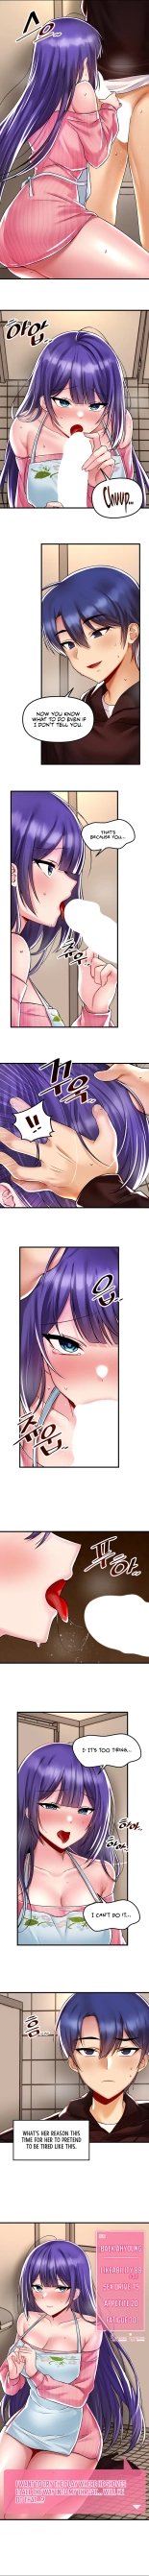 Trapped in the Academy's Eroge : page 309